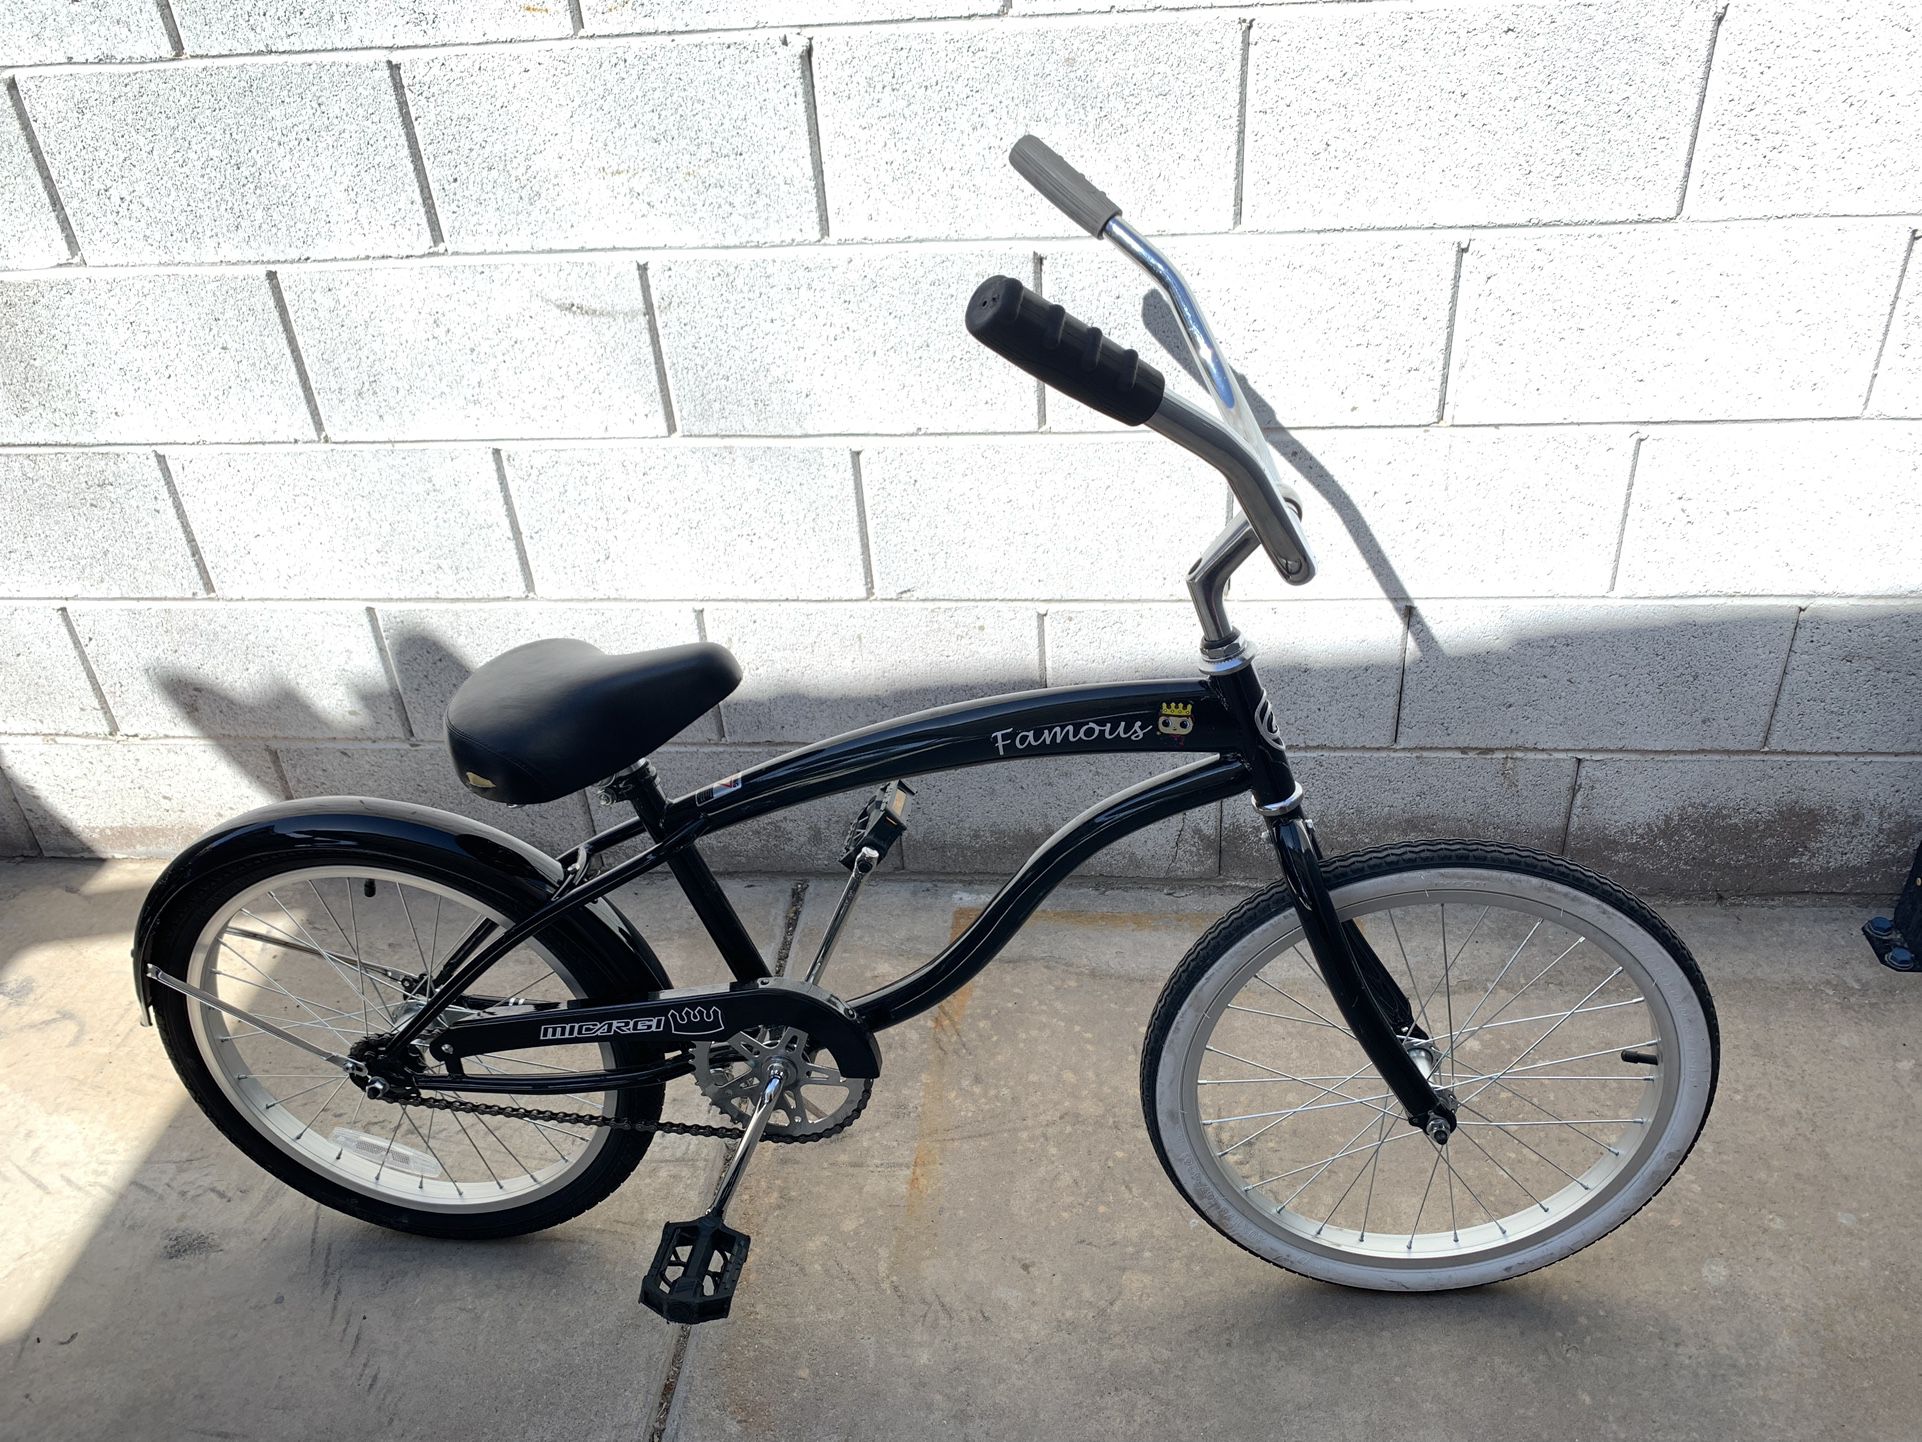 MICARGI Famous Cruiser Bike Bicycle 20inch Rims New Inner Tubes Pedal Brakes Ready To ride 